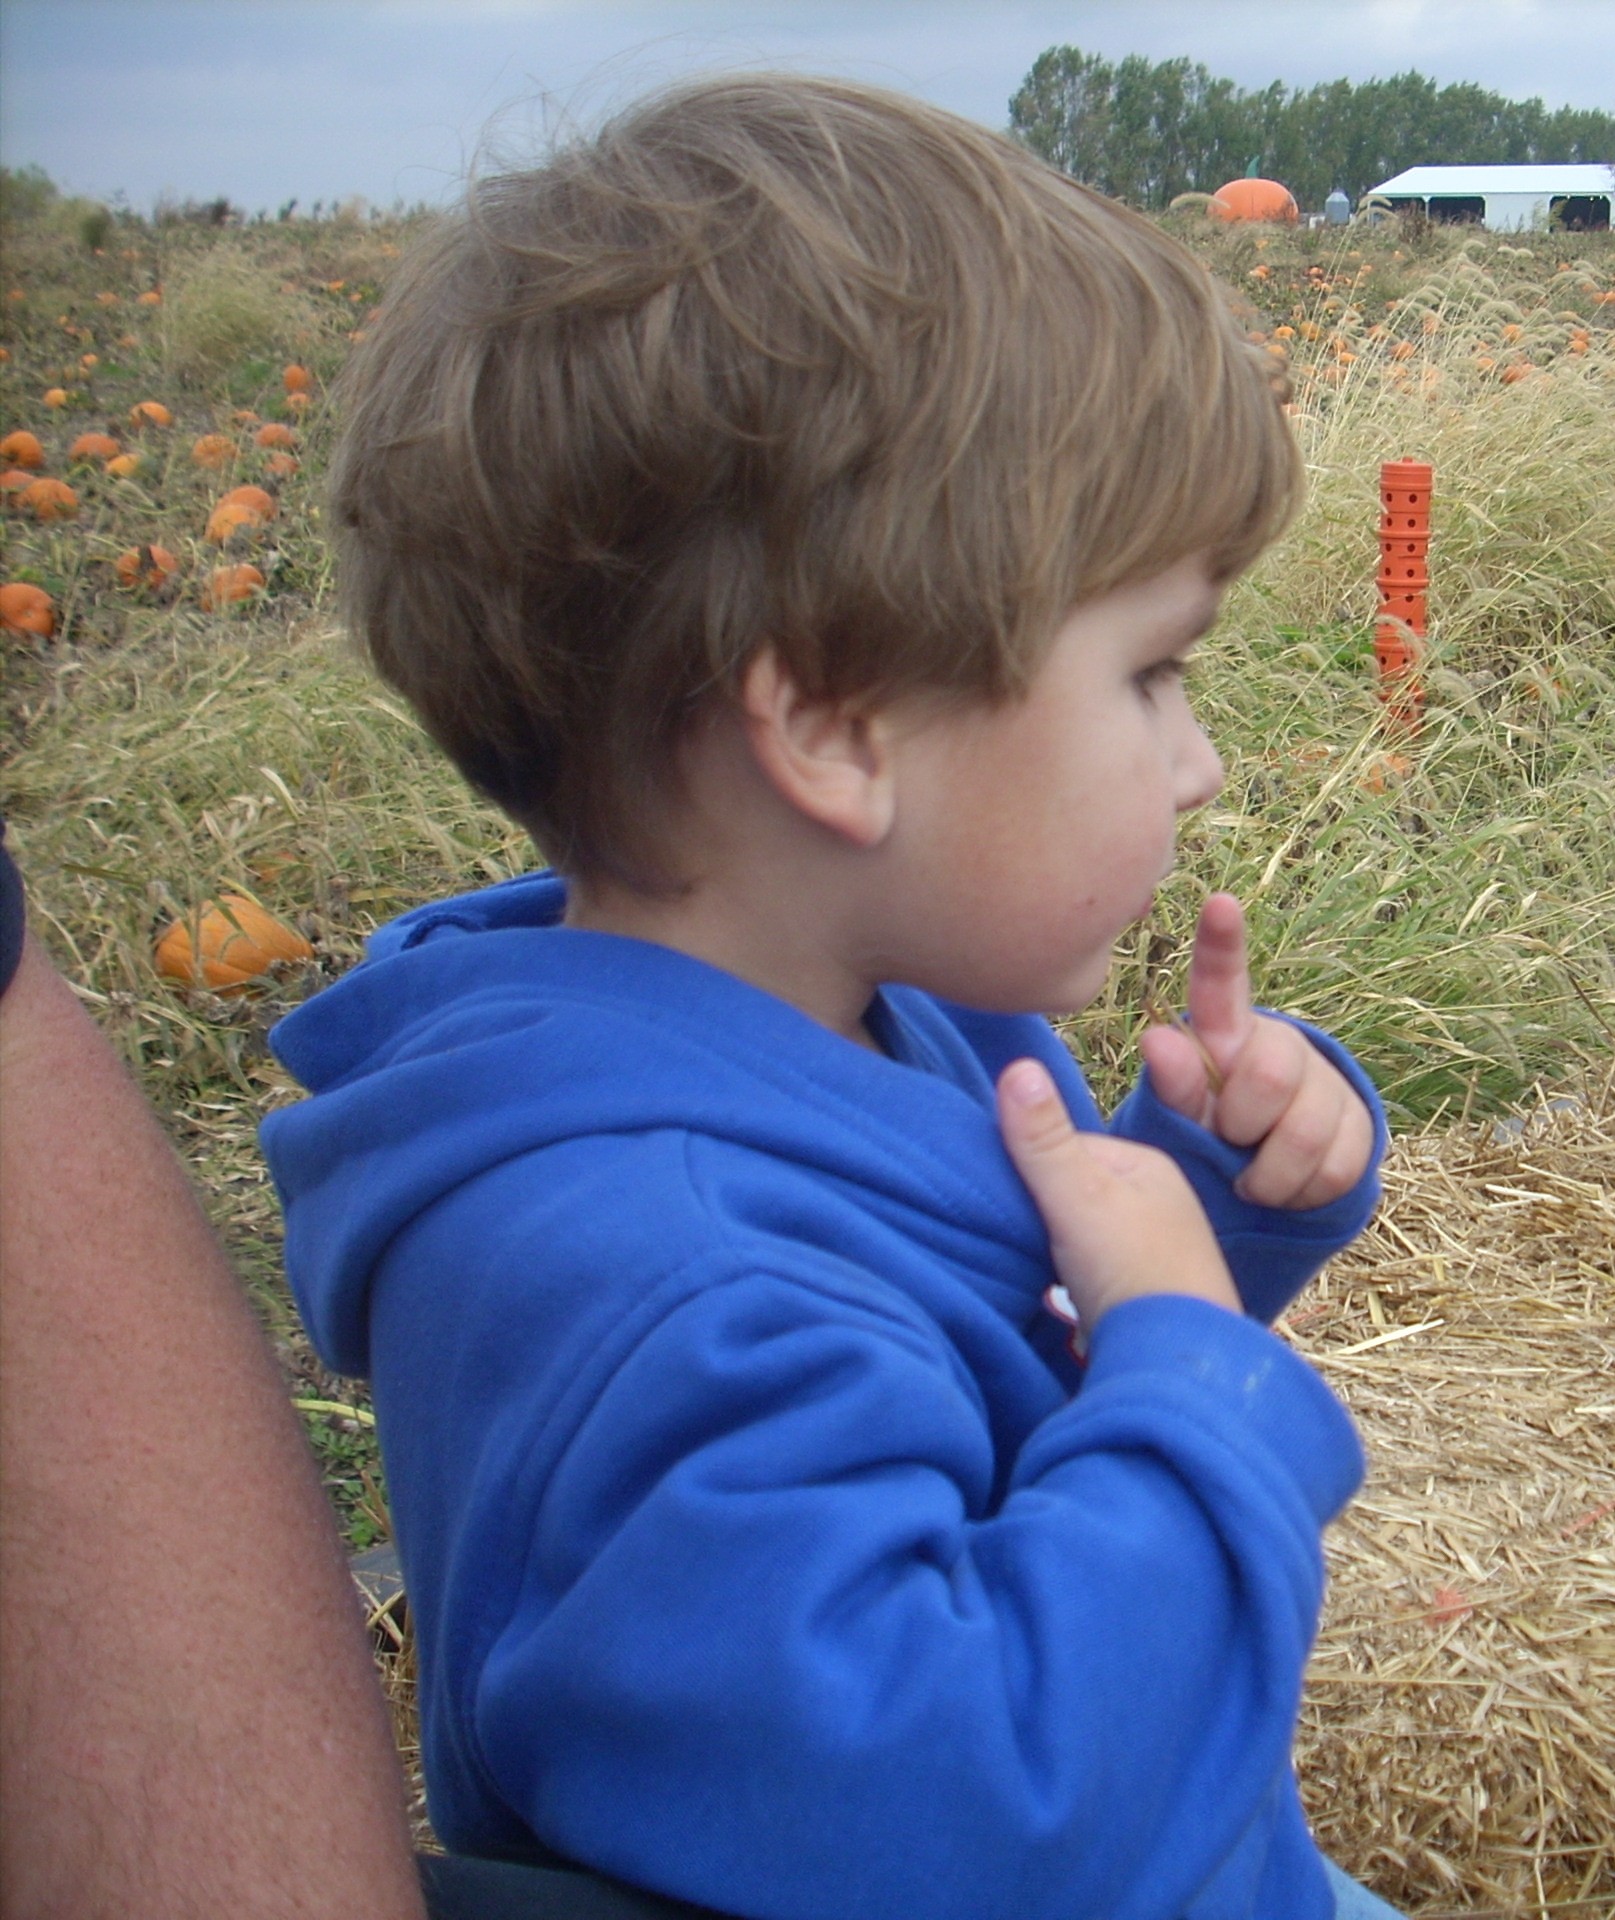 Top Pumpkin Patches in The Midwest